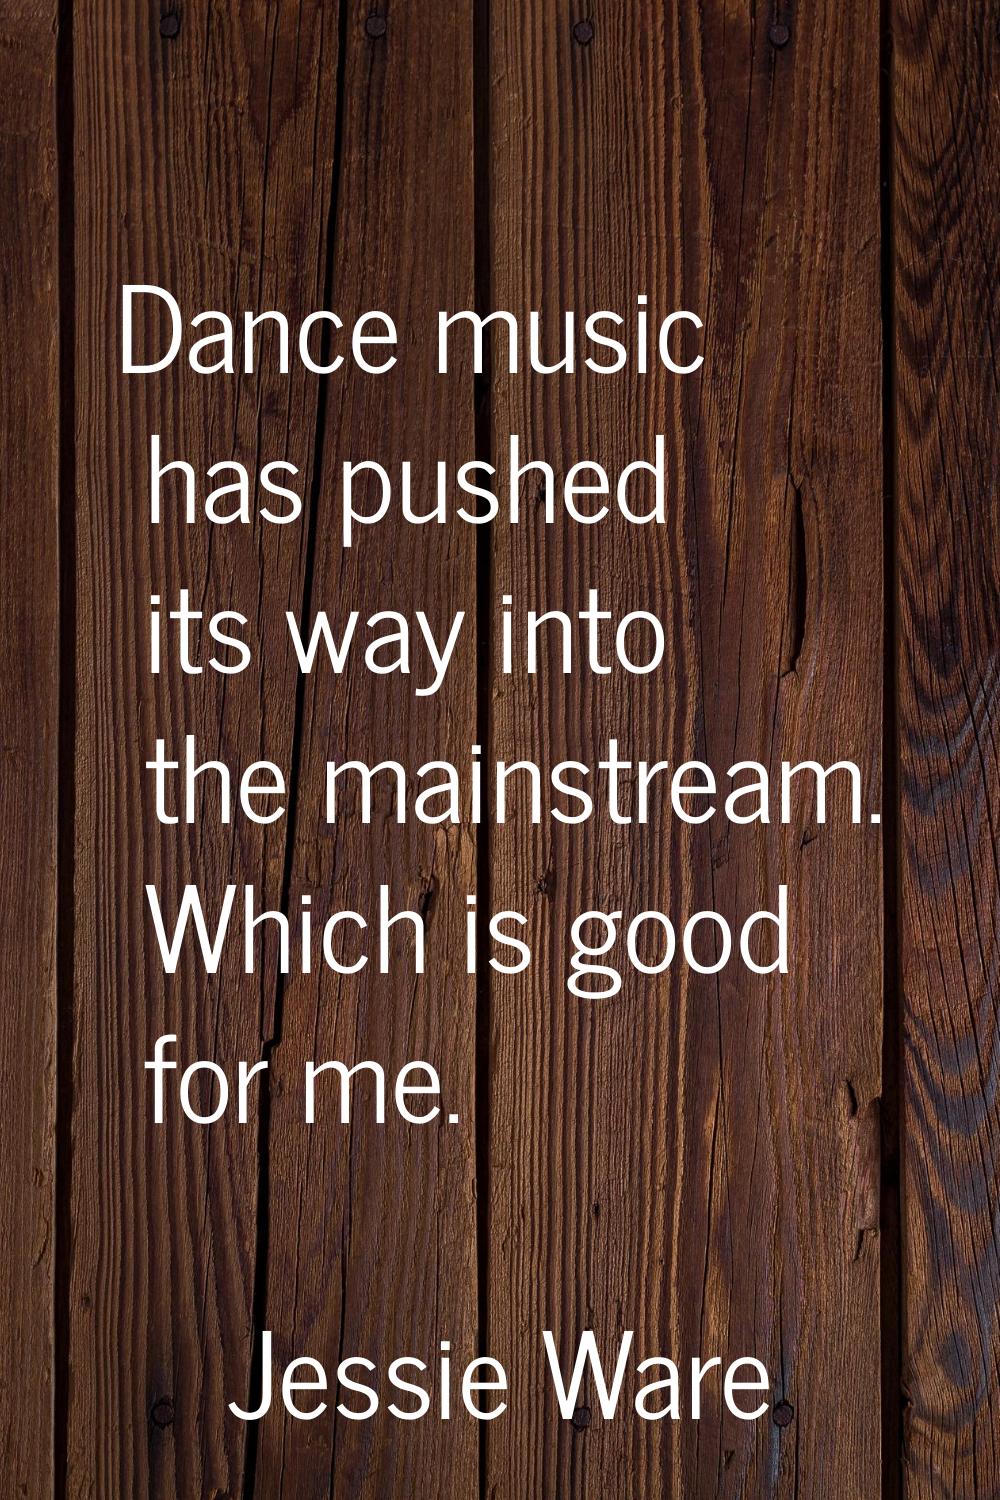 Dance music has pushed its way into the mainstream. Which is good for me.